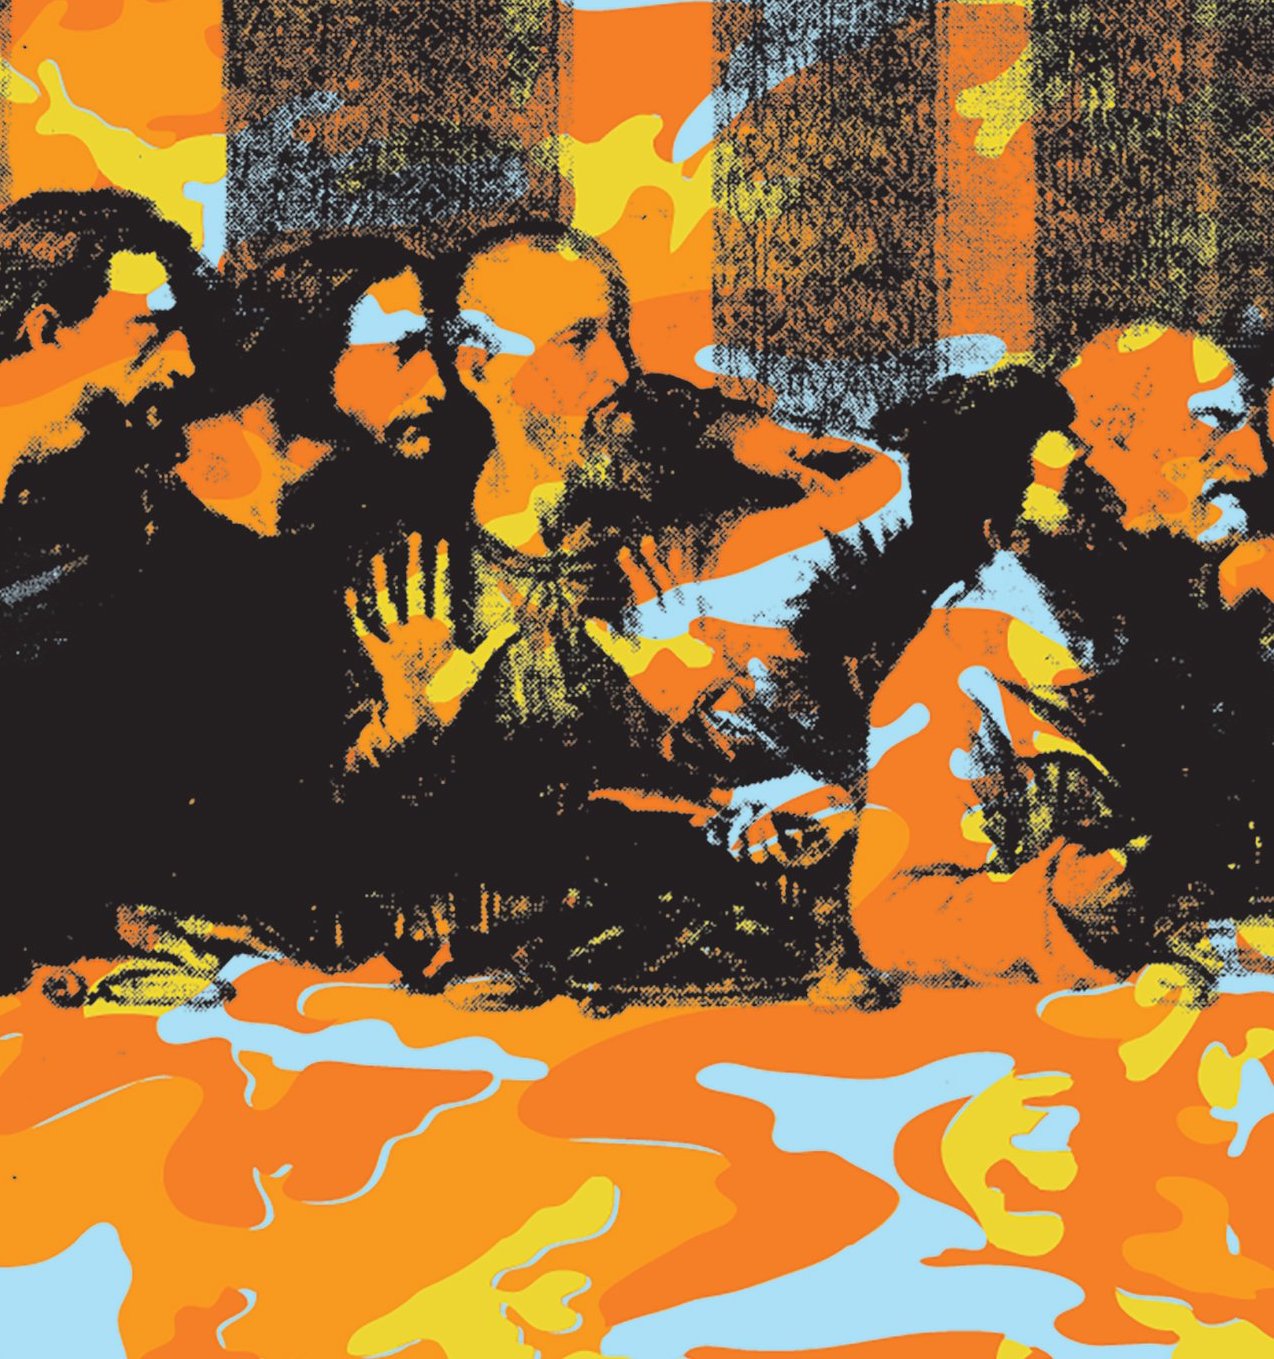 The-Last-Supper-Mural---Orchard-detail.jpg